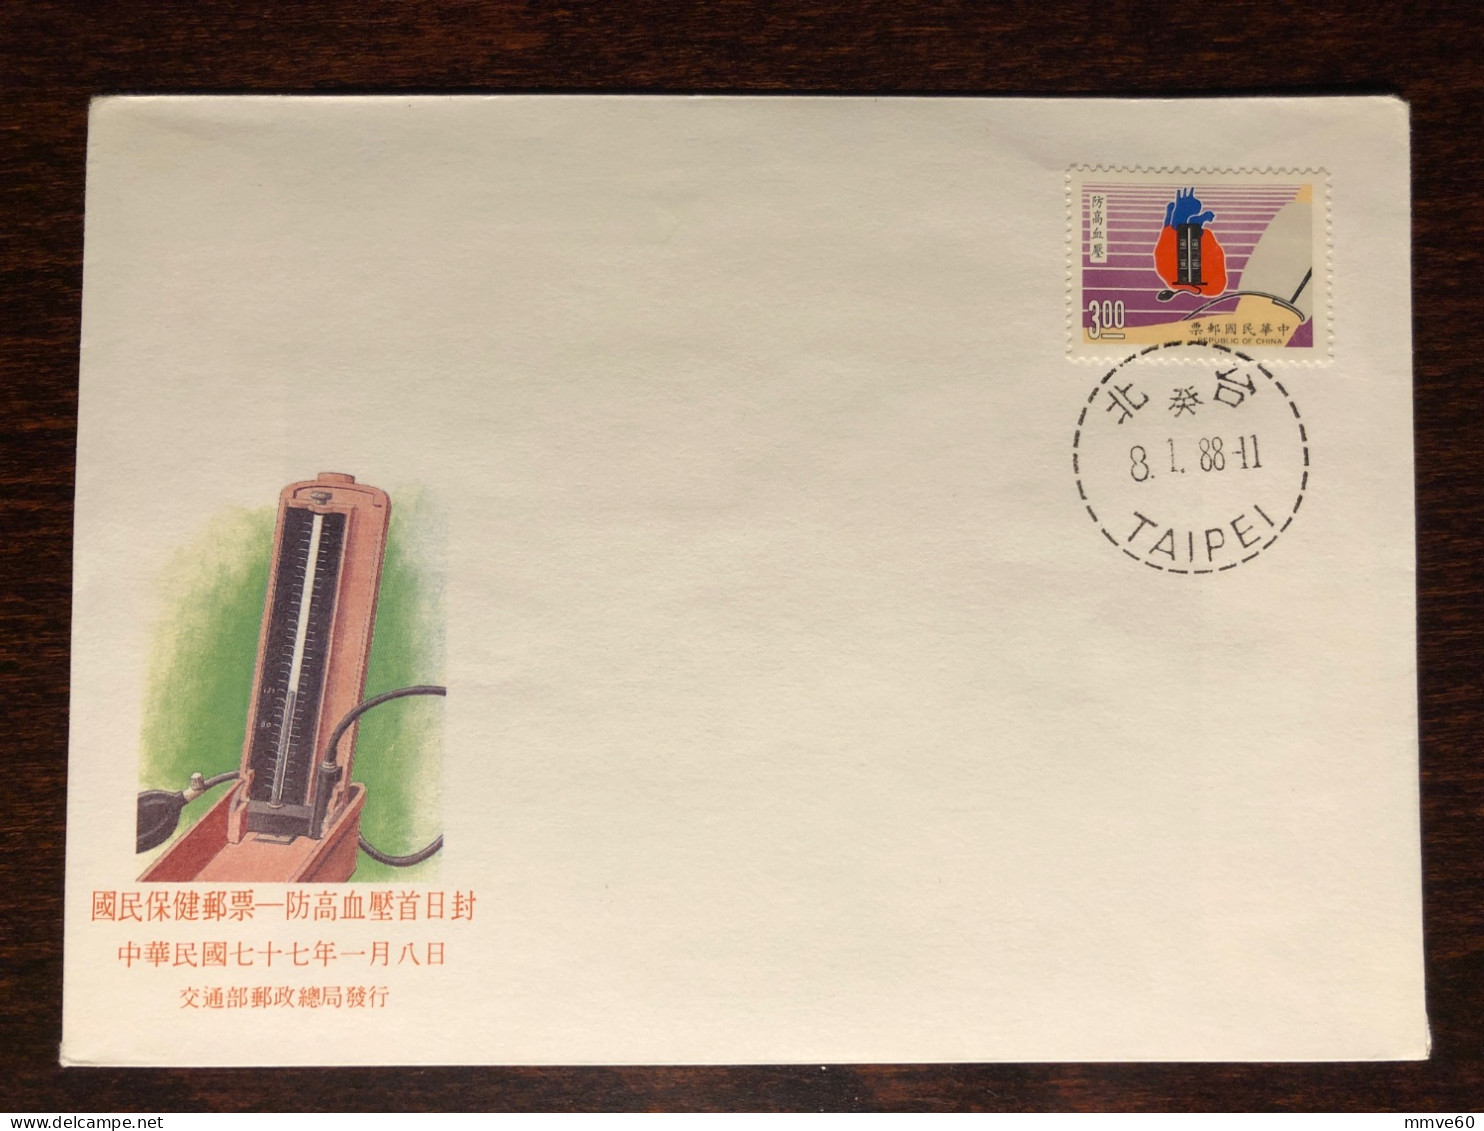 TAIWAN ROC FDC COVER 1988 YEAR HYPERTENSION BLOOD PRESSURE HEALTH MEDICINE STAMPS - FDC